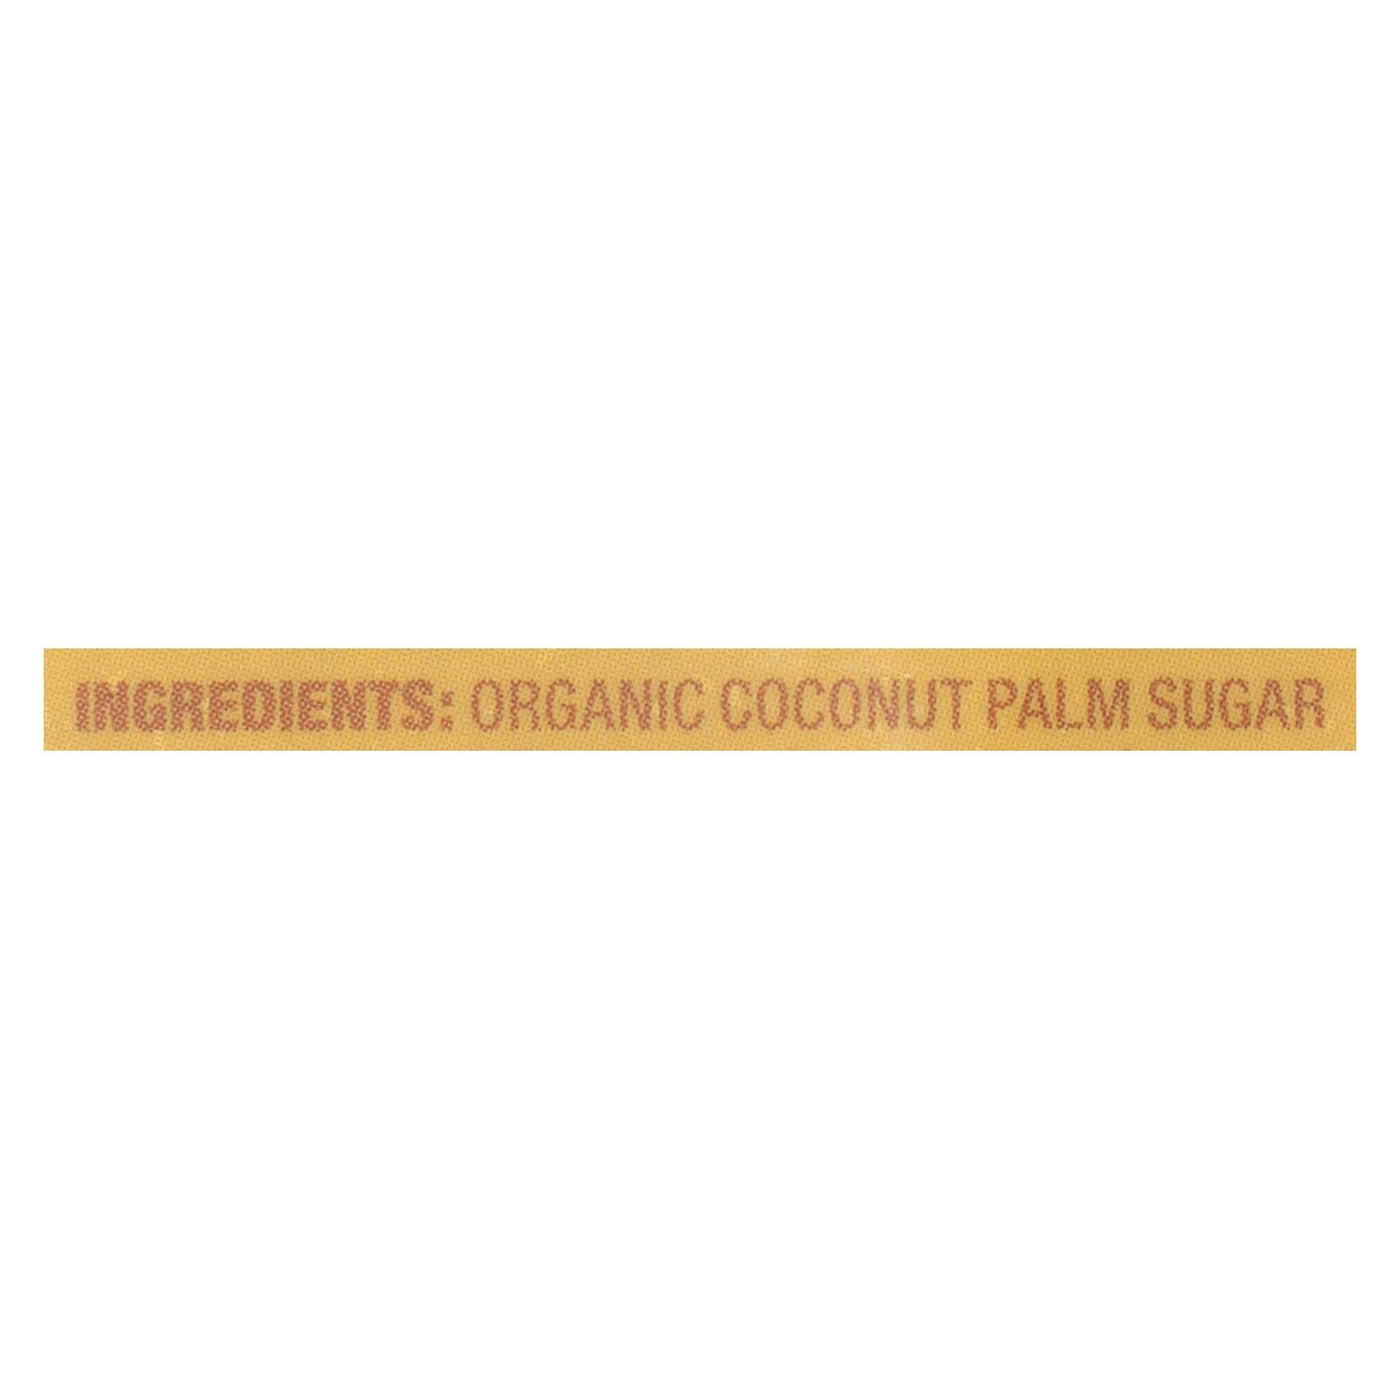 Buy Wholesome Sweeteners Sugar - Organic - Coconut Palm - 16 Oz - Case Of 6  at OnlyNaturals.us